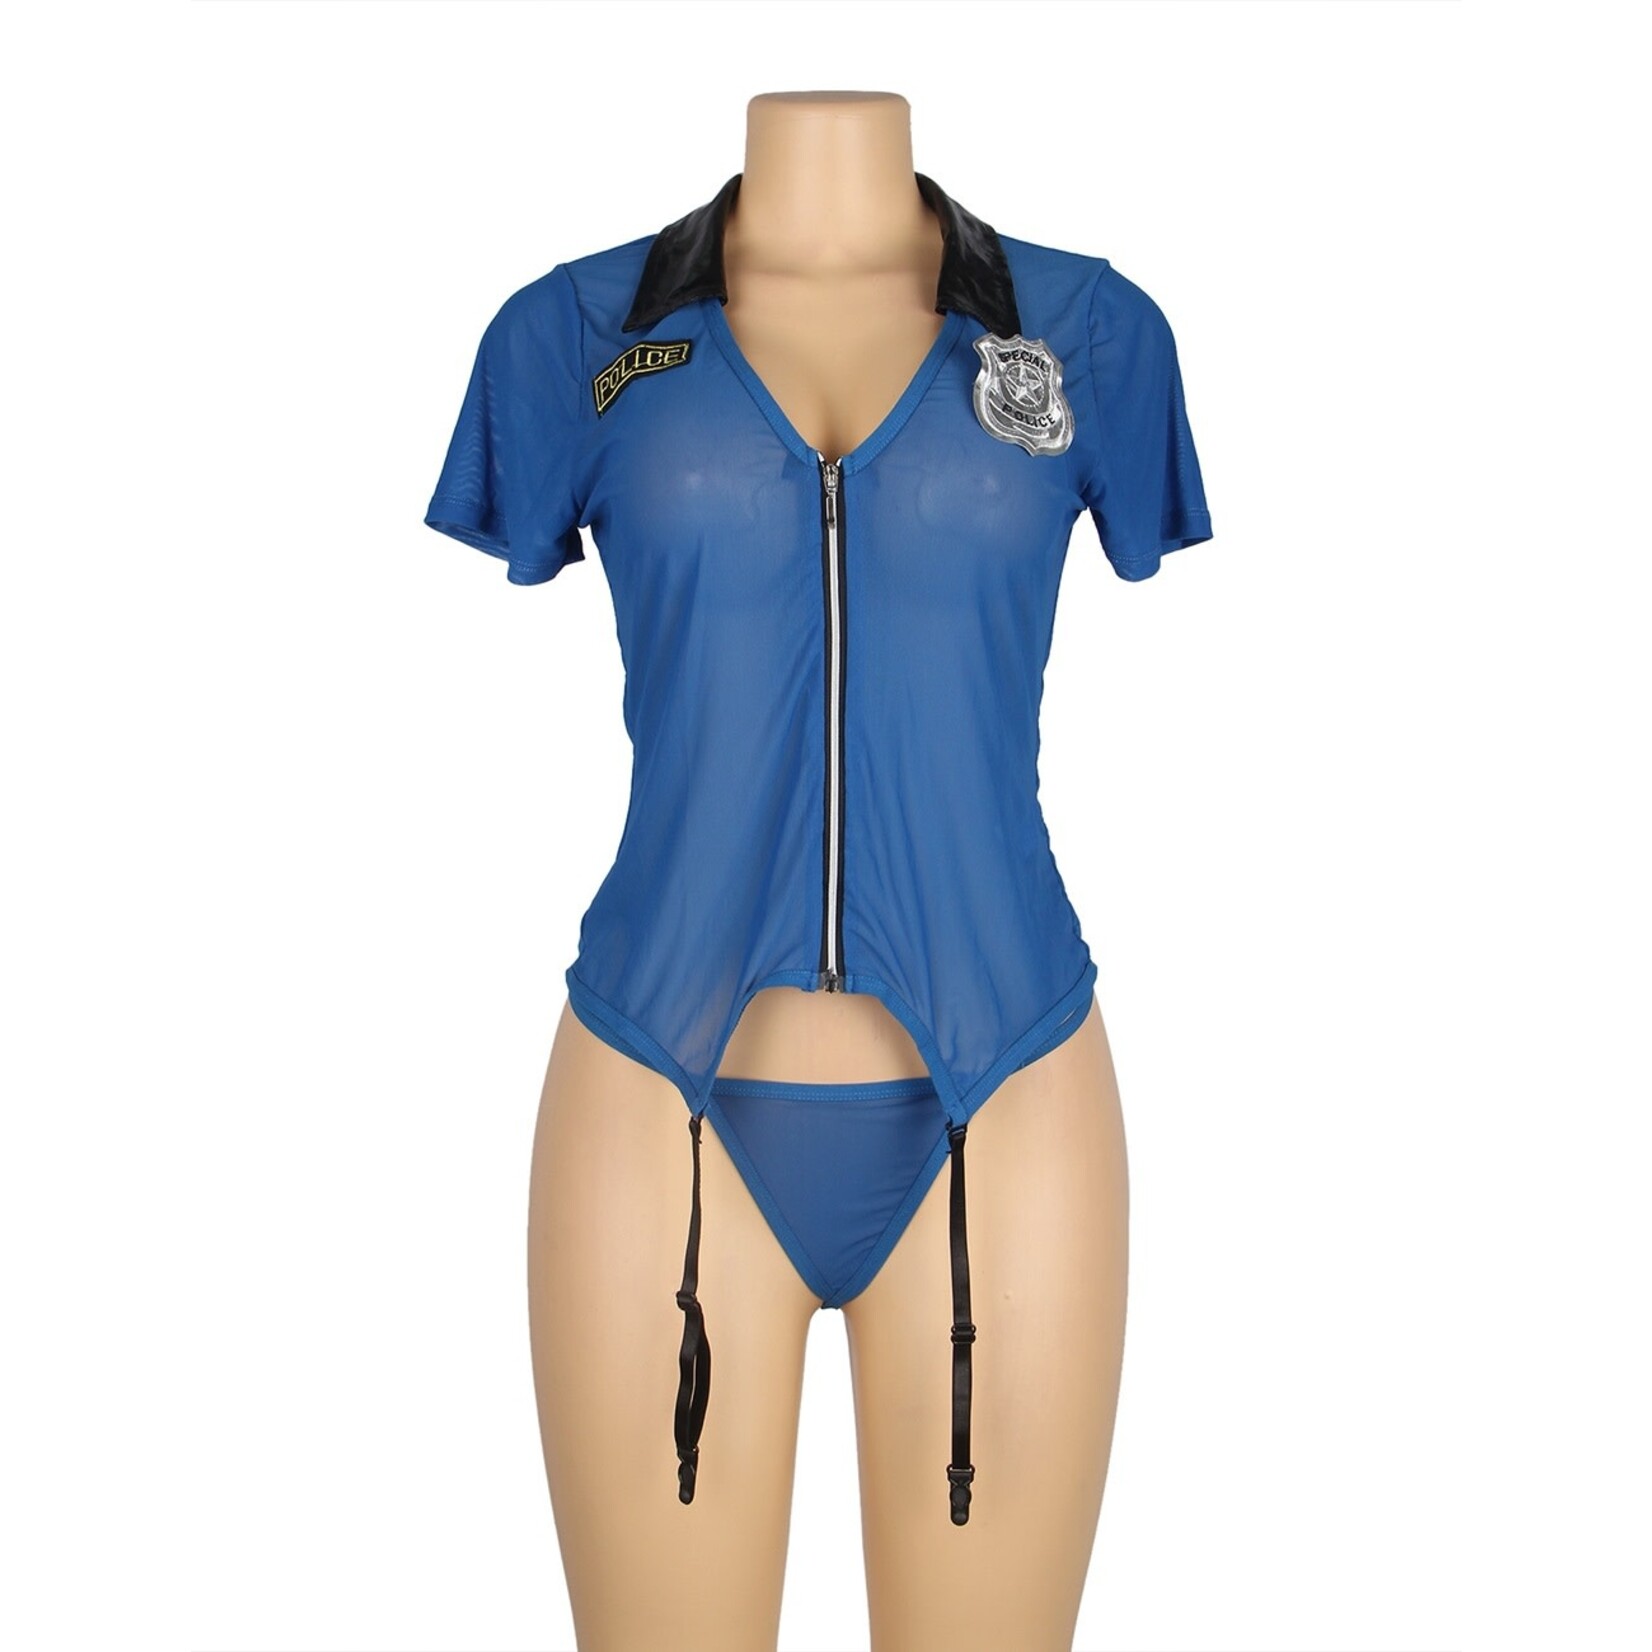 OH YEAH! -  BLUE ZIPPER FRONT SEXY GARTER BELT POLICE COSTUME WITH HANDCUFFS M-L